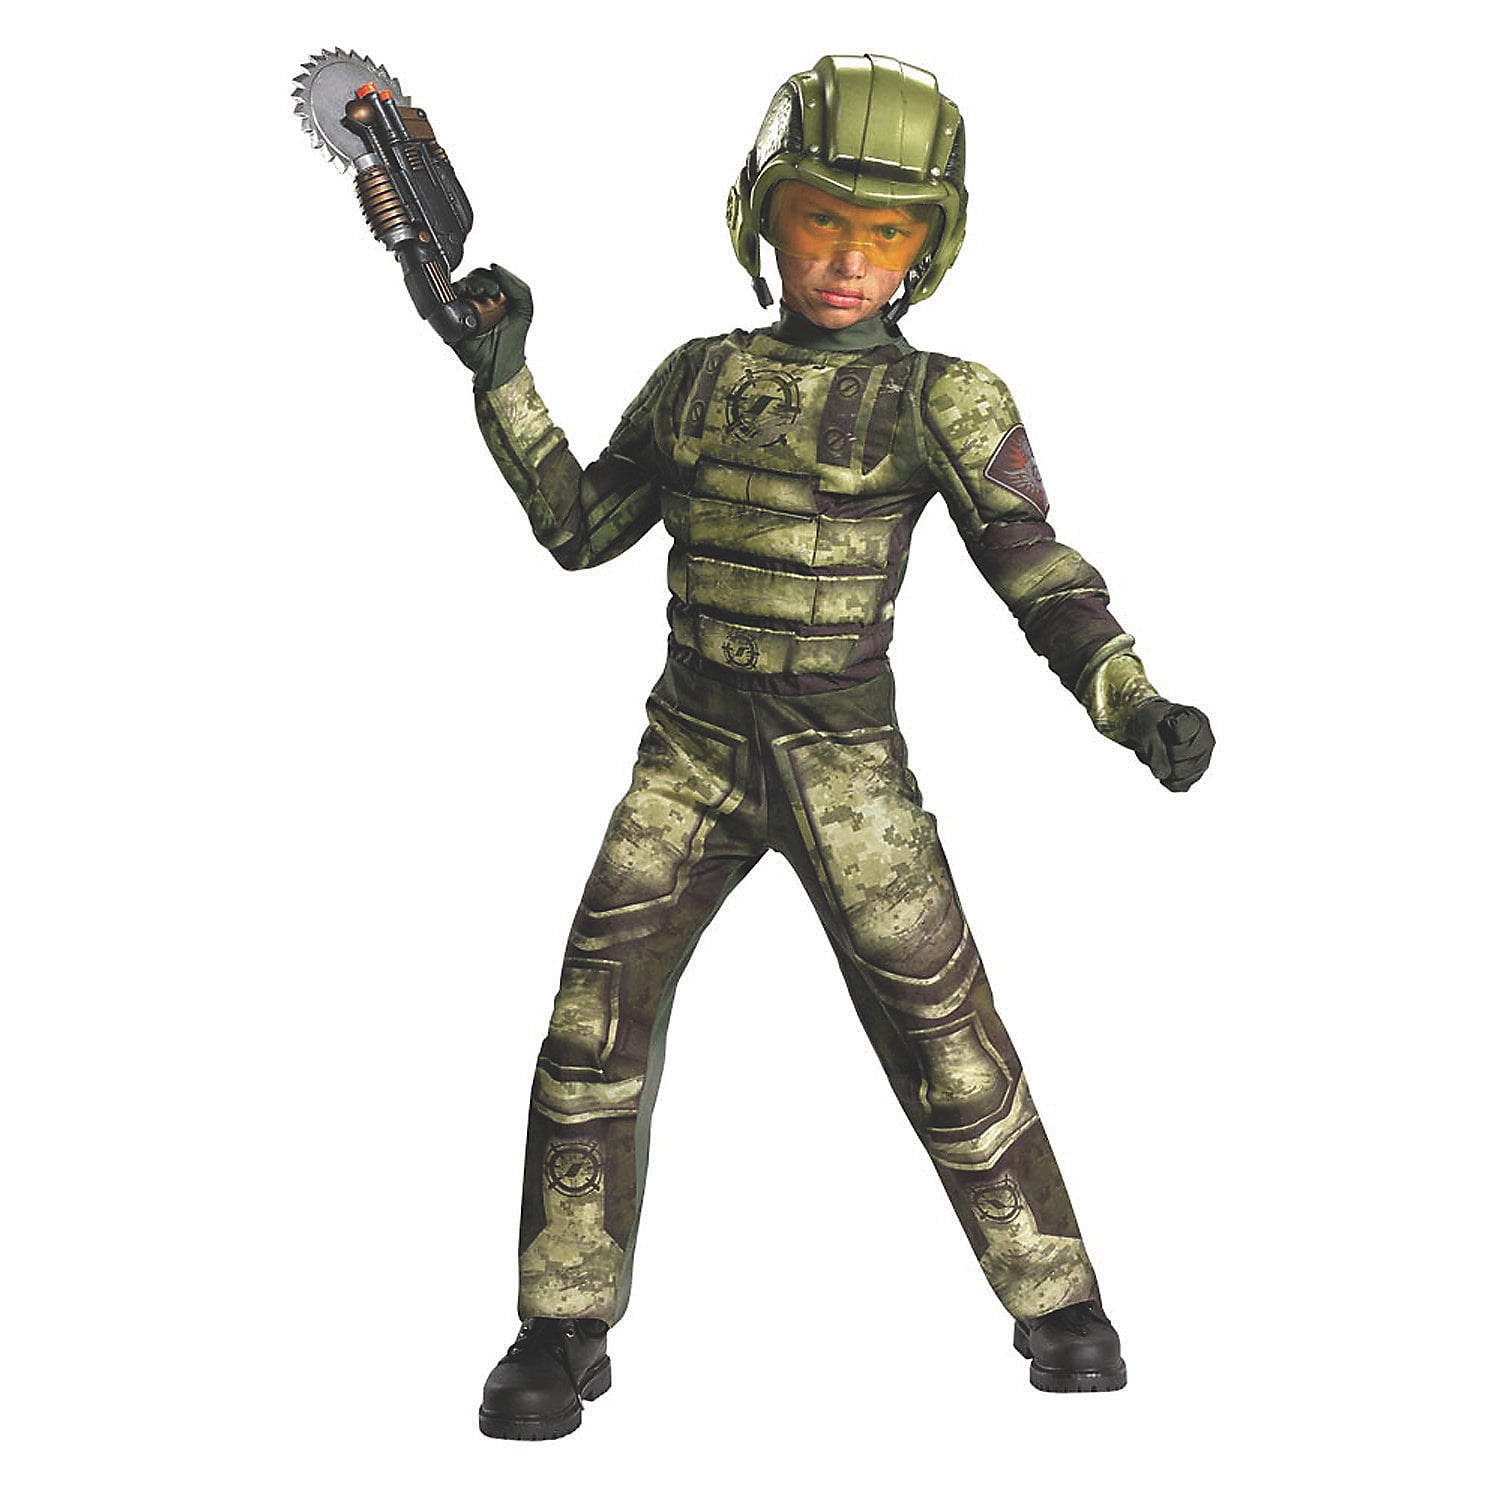 Dress Up America Army Costume for kids – Soldier Costume For Boys and Girls  Large